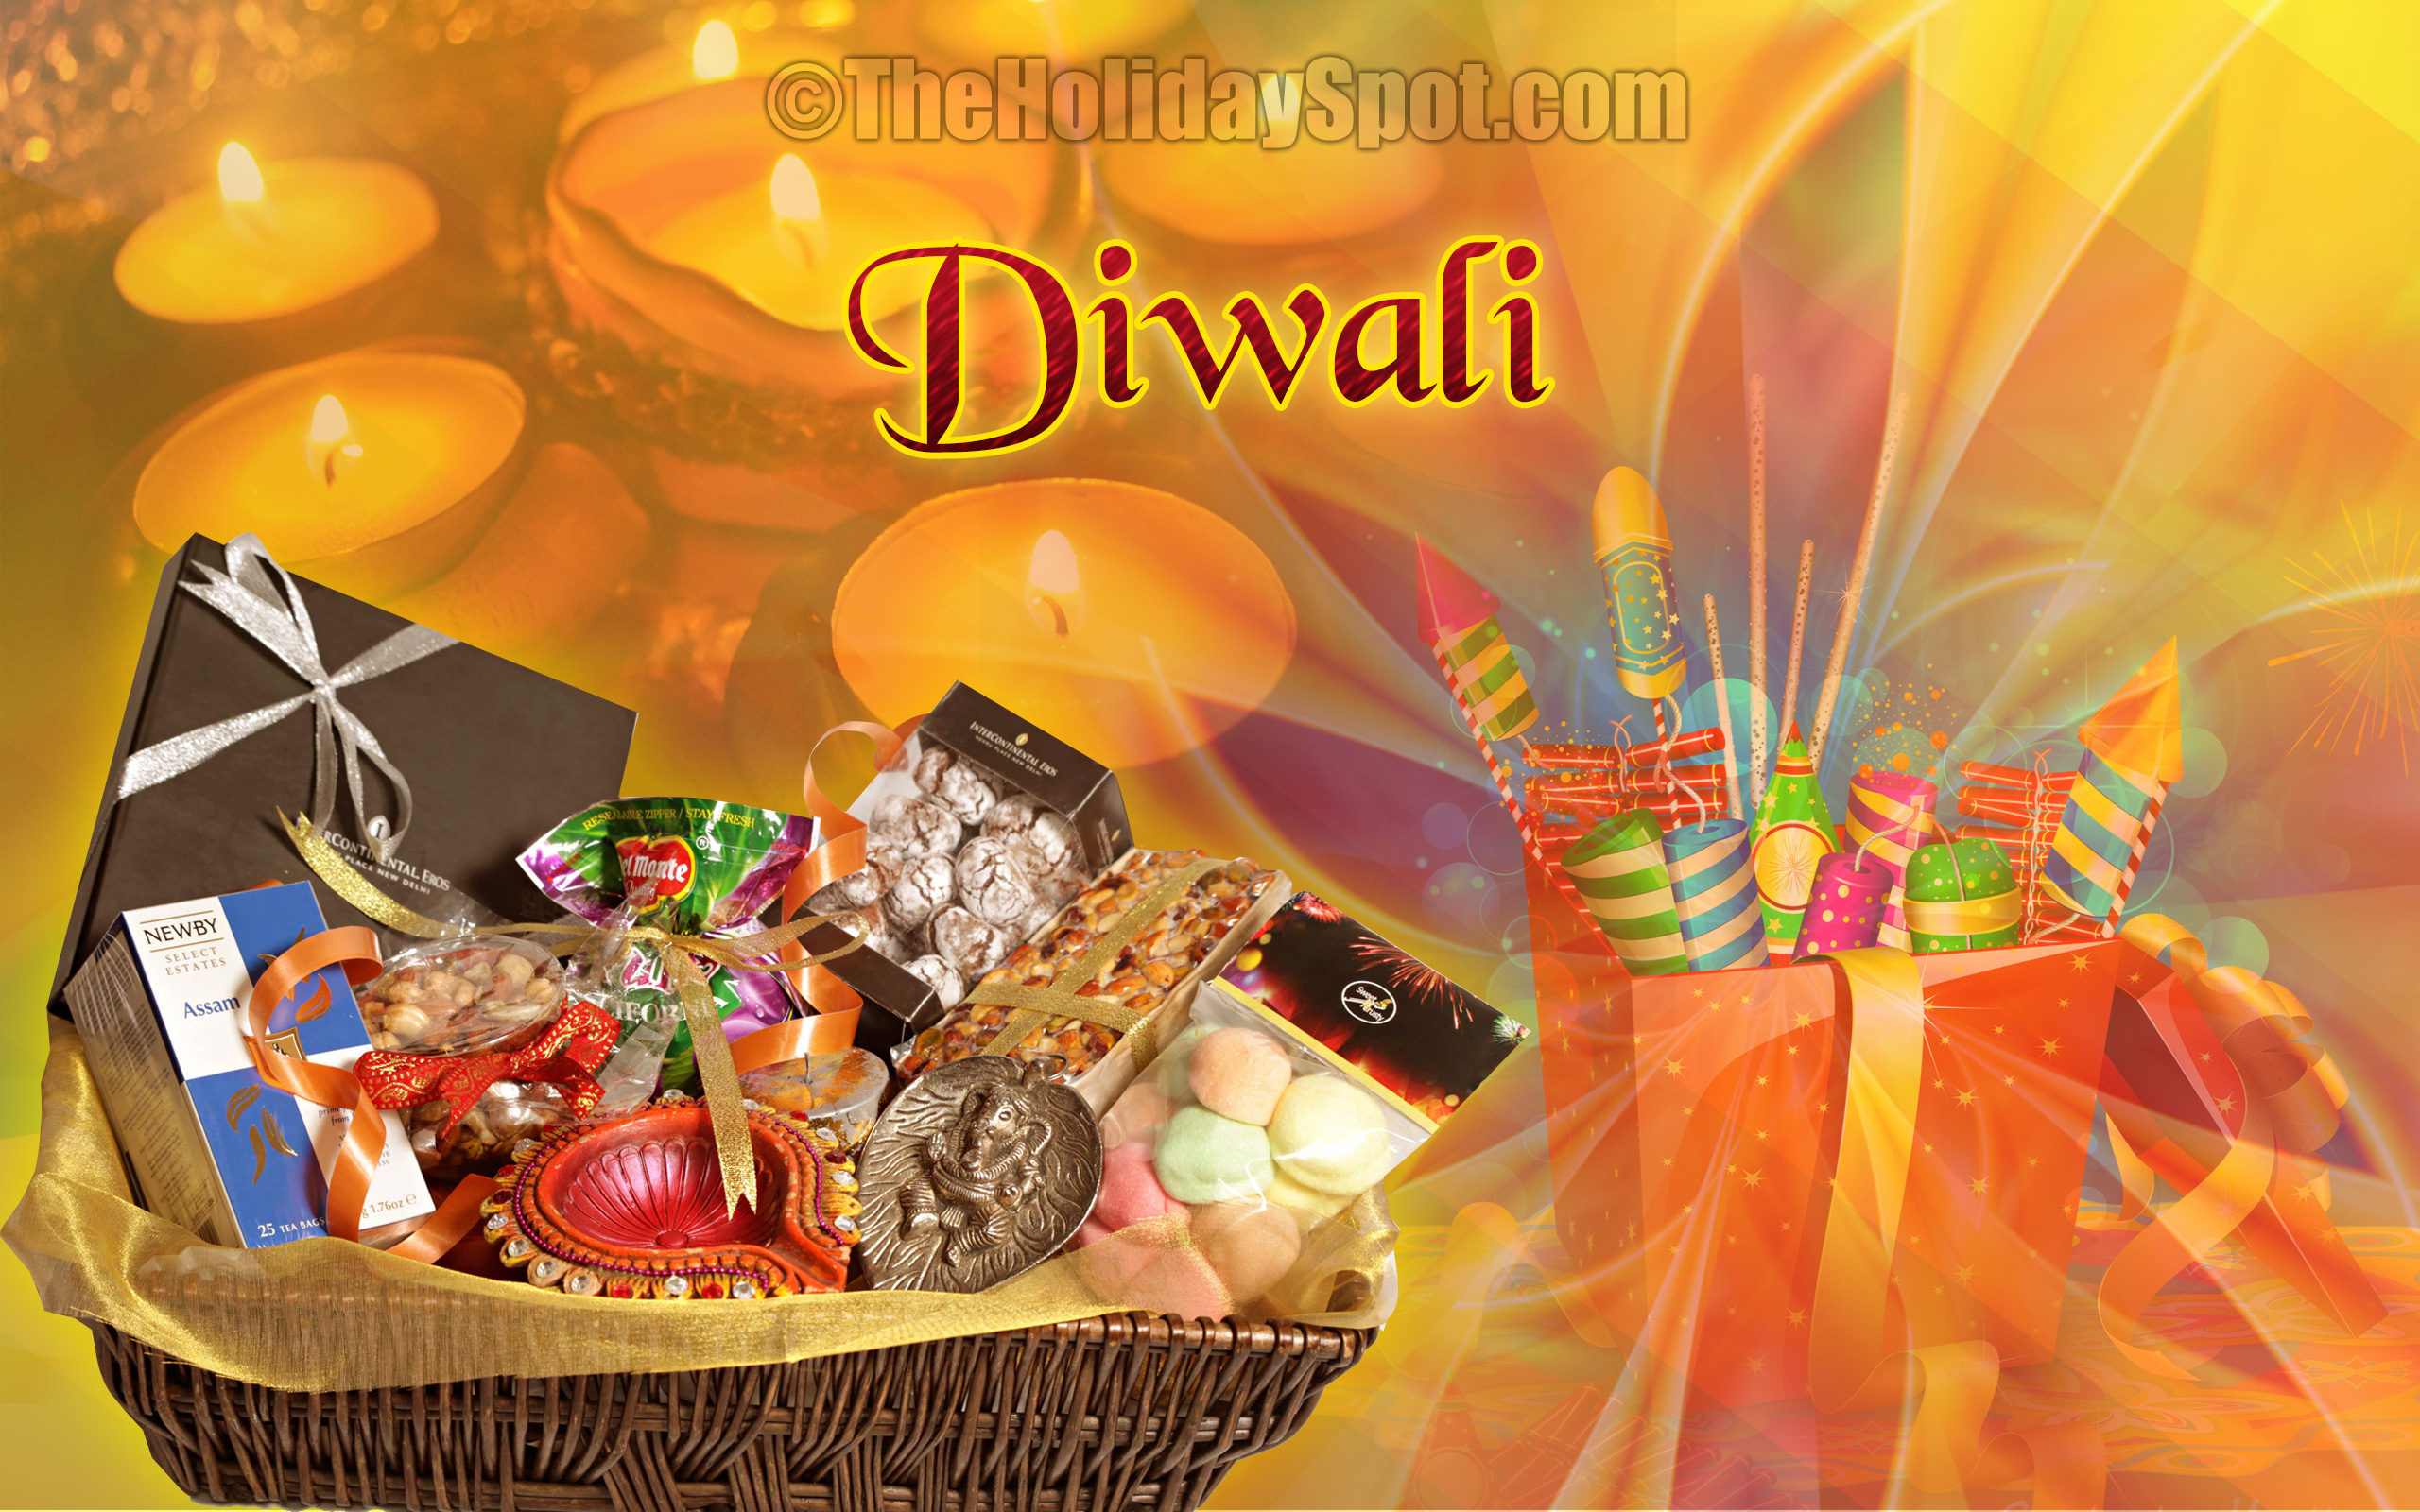 Diwali Gifts And Fire Crackers - Gift Hamper For Diwali - 2560x1600  Wallpaper 